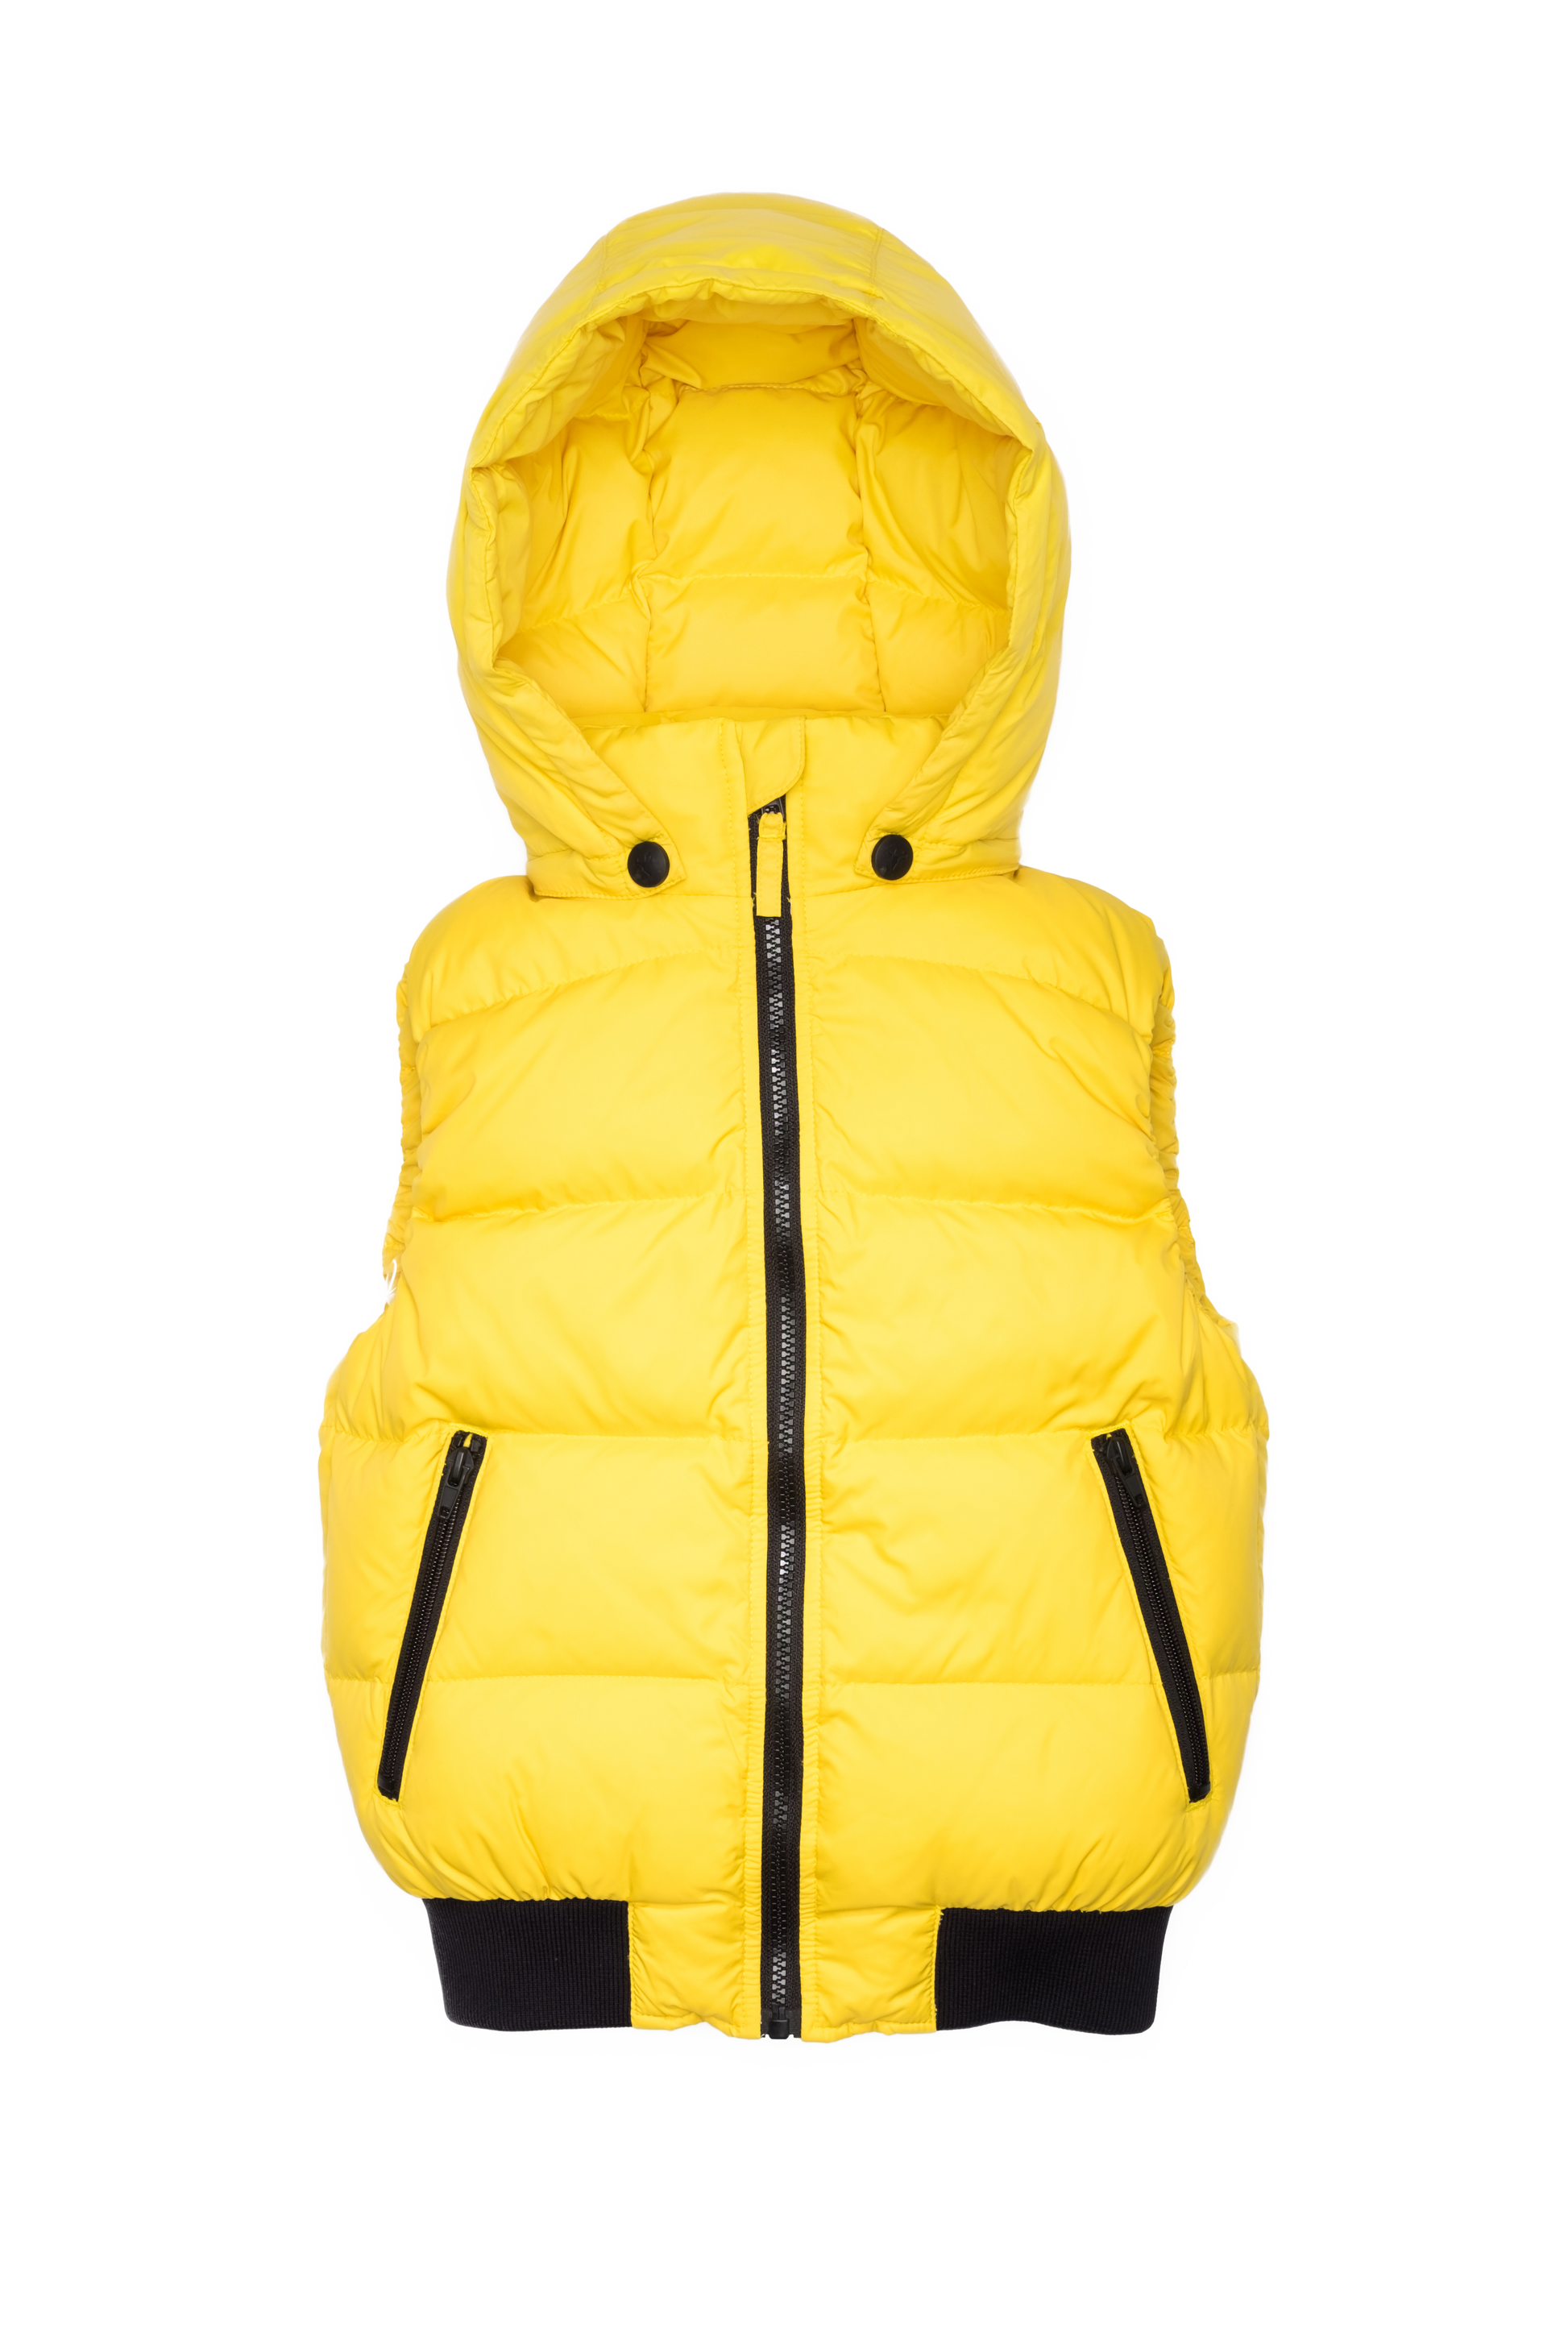 Sleeveless down filled kids vest with a hood and contrast zipper details in yellow Citron and Navy